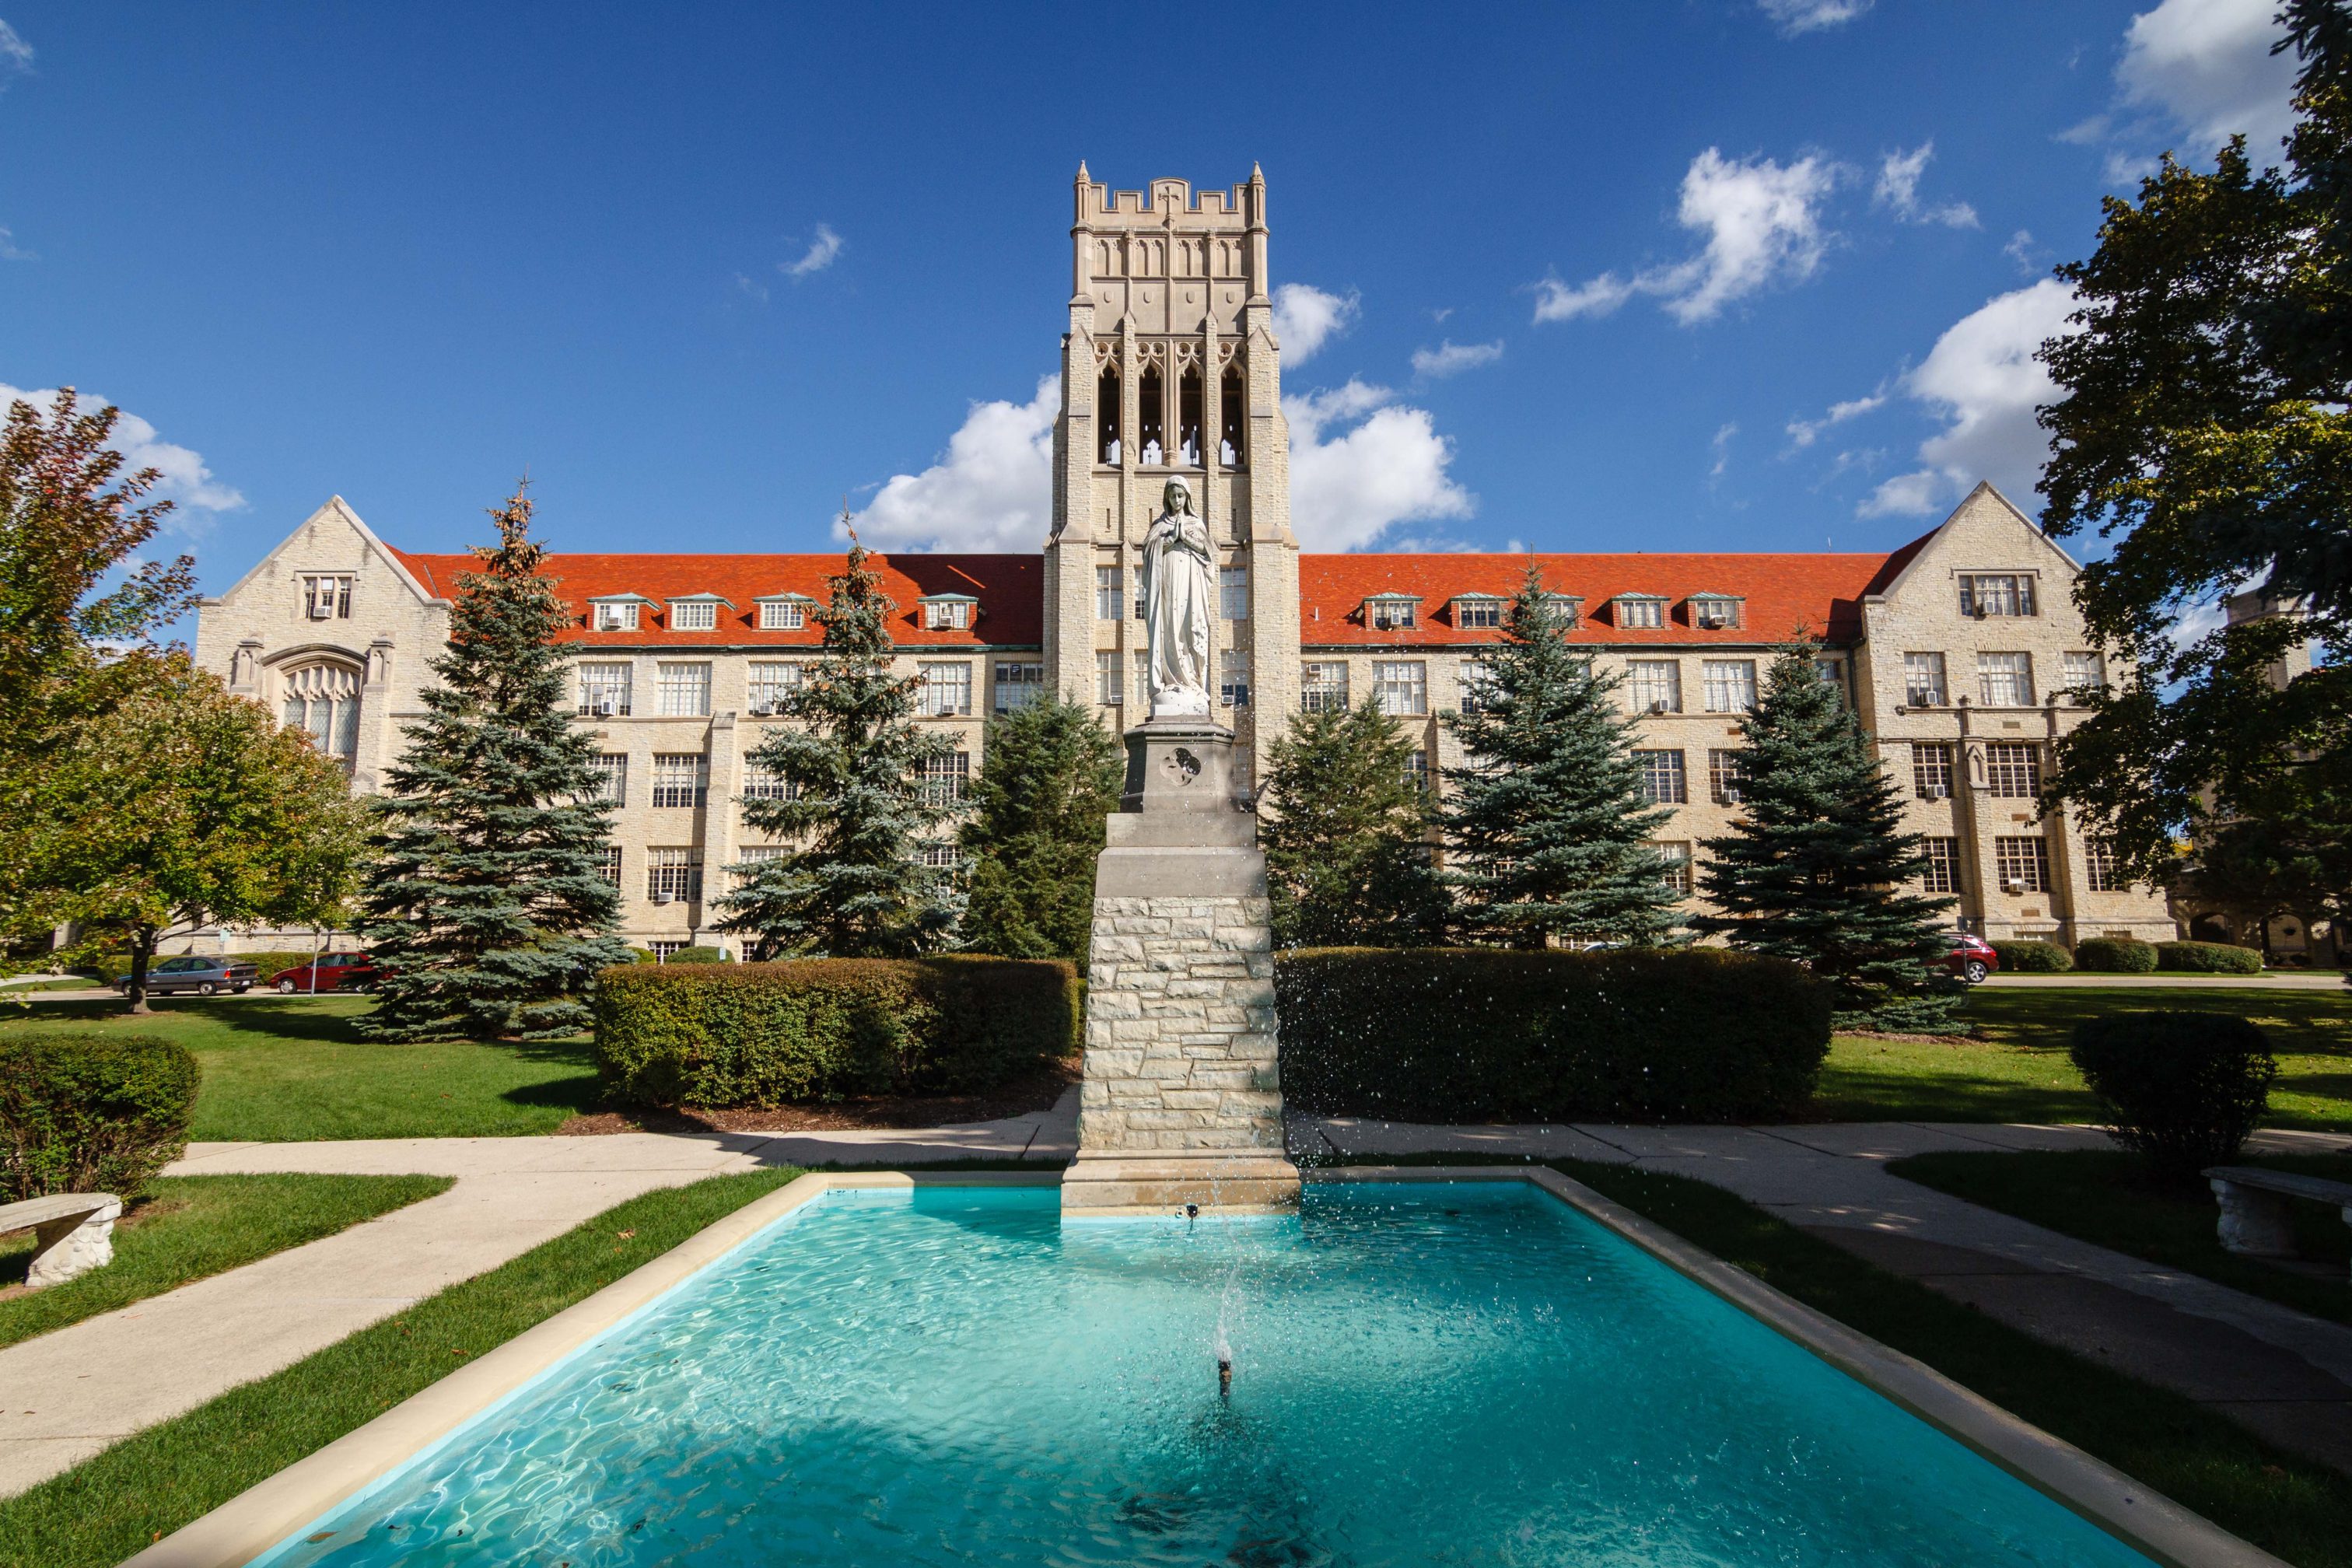 Although its origins date back to 1872, Mount Mary University first opened its Milwaukee campus in 1929 and continues to educate students today. 